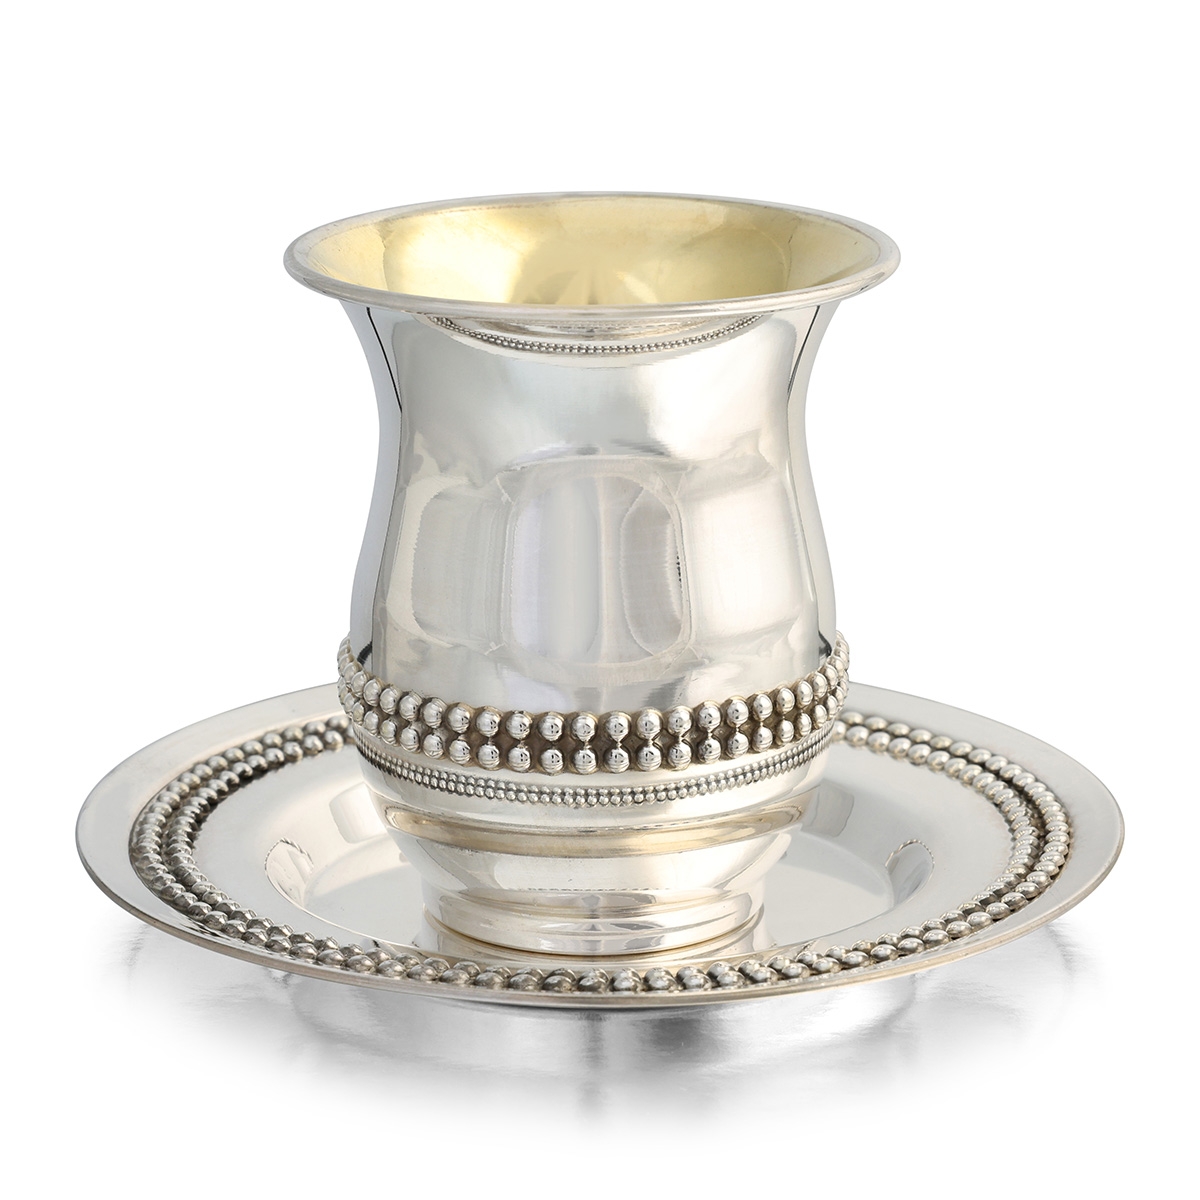 Sterling Silver Kiddush Cup and Saucer with Beaded Filigree Design - 1